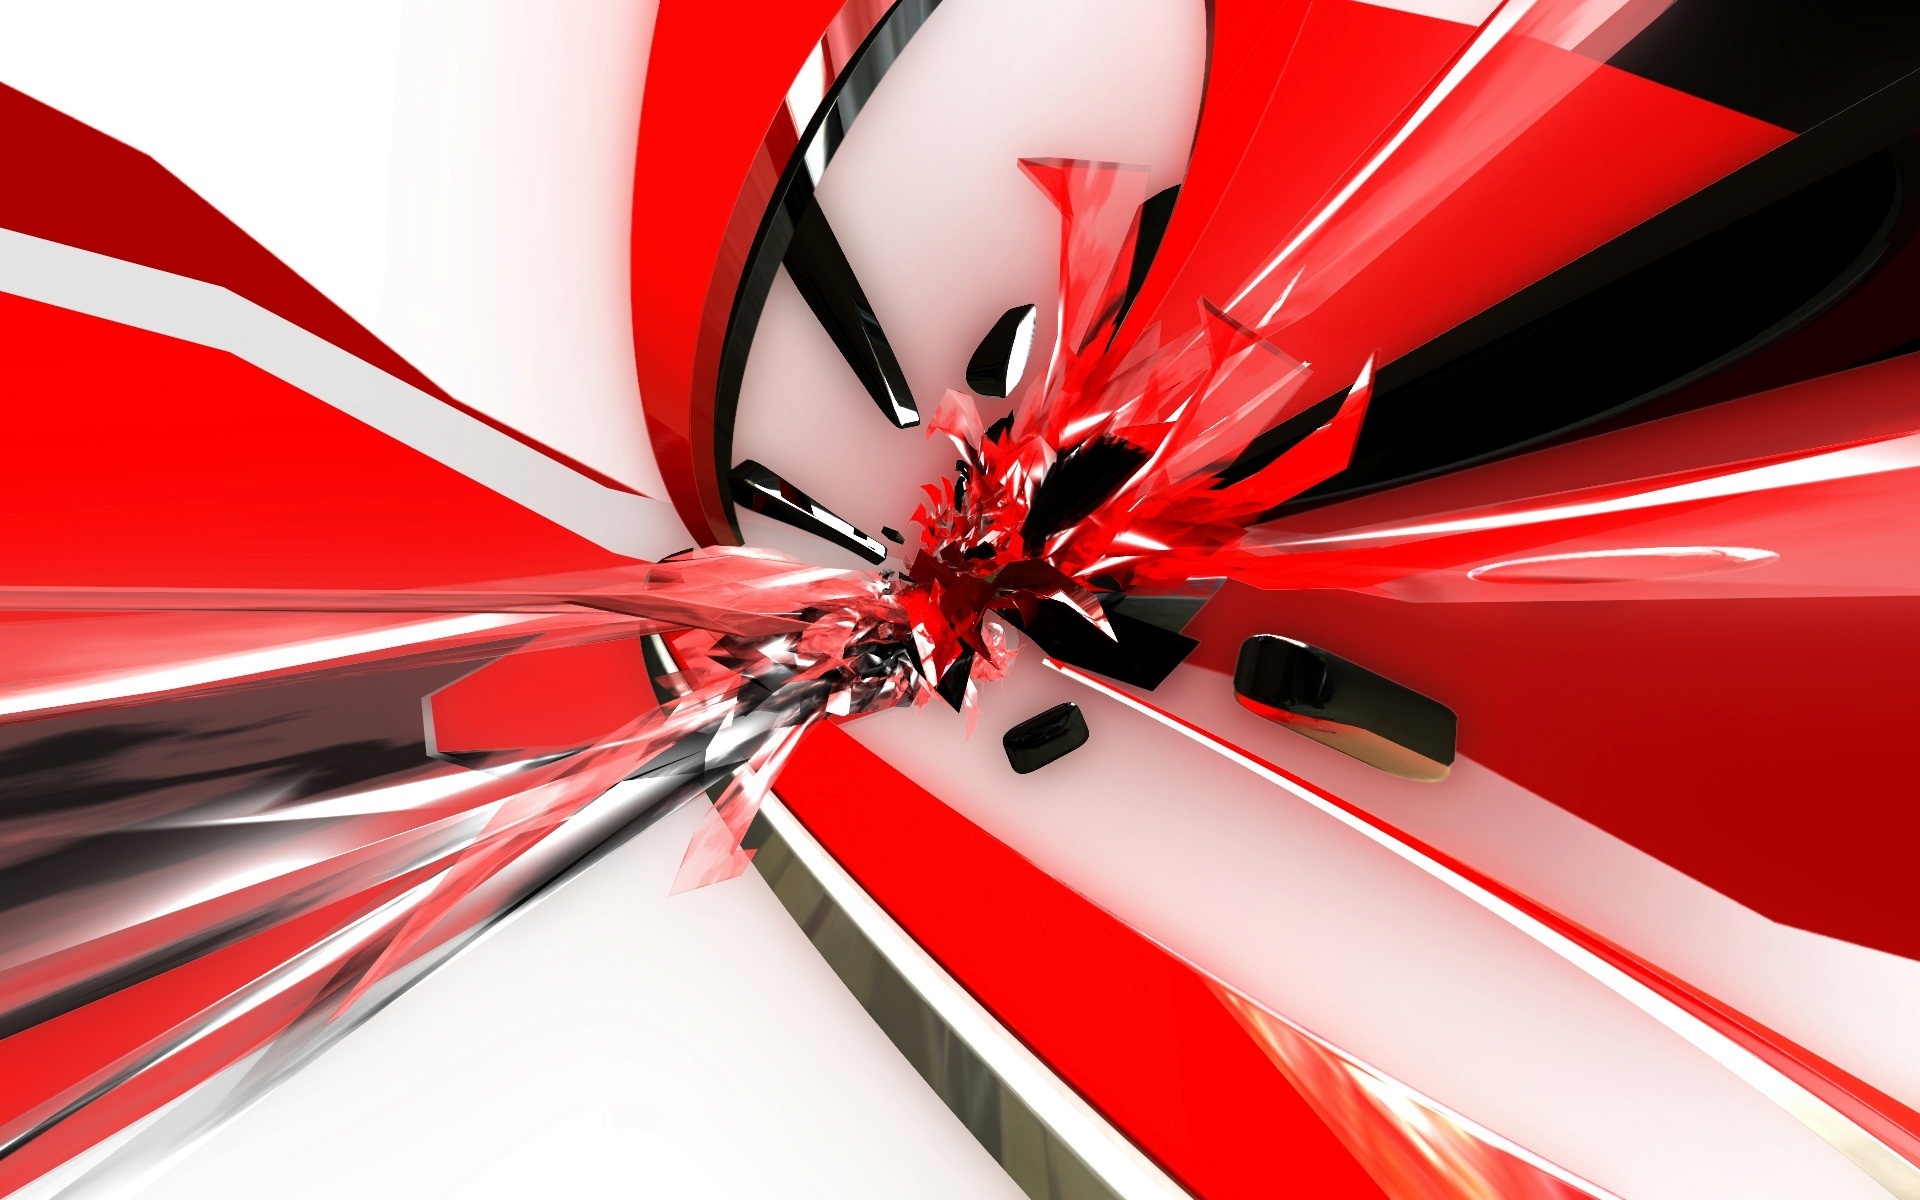 Cool Abstract Wallpaper Designs Red Cool Abstract